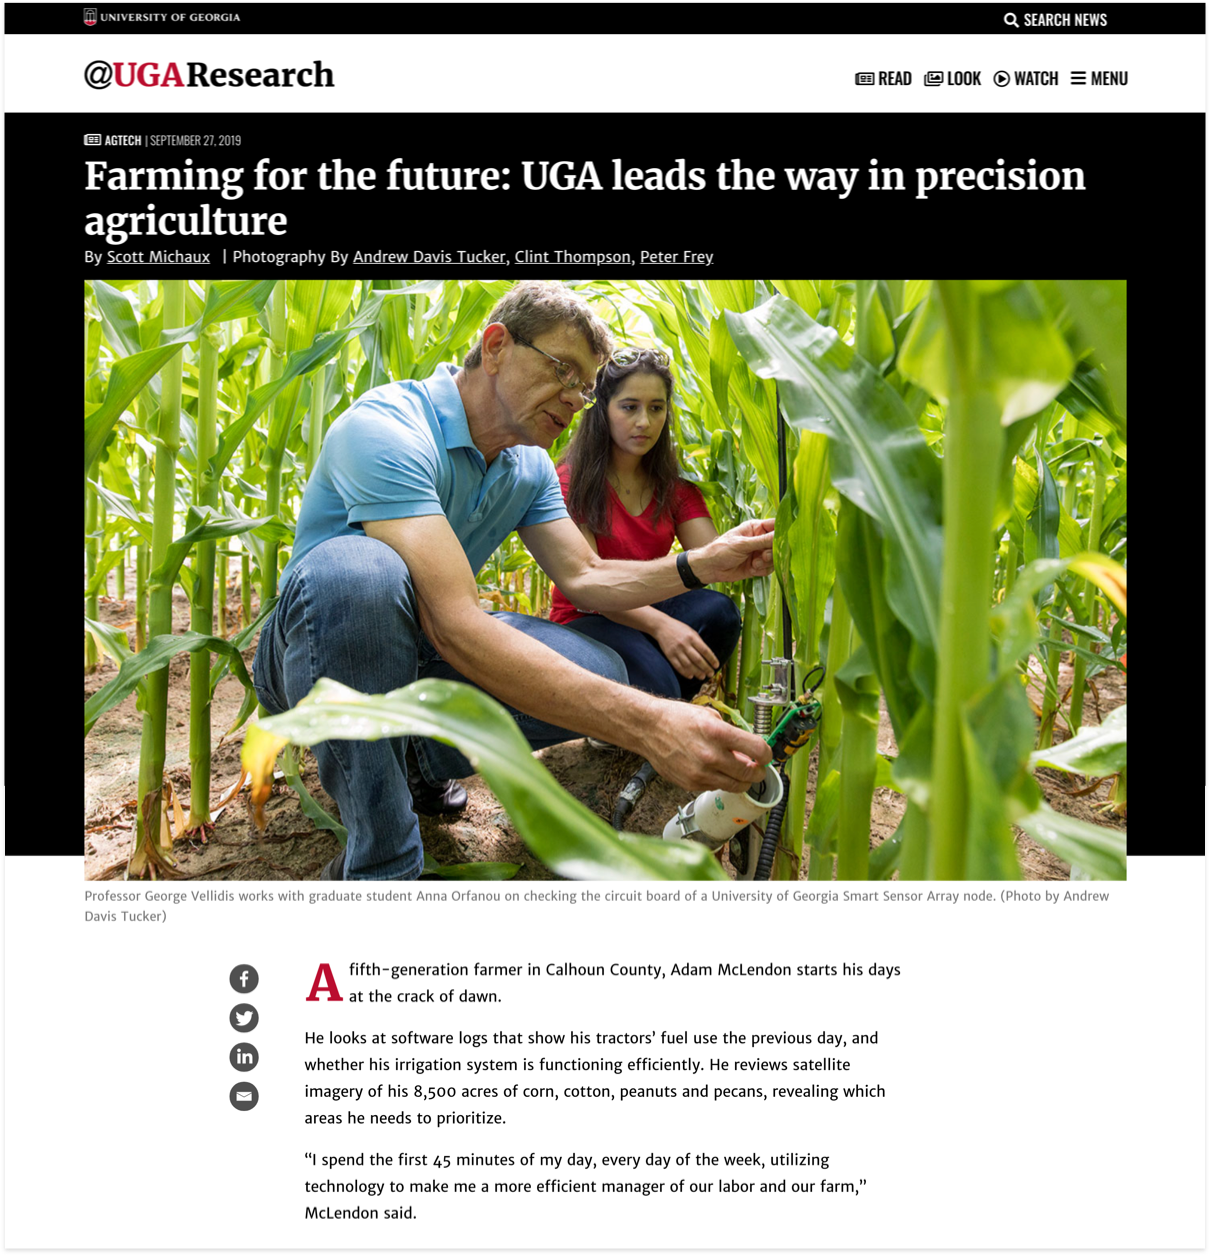 UGA Research News READ feature story, the heading with title and featured image